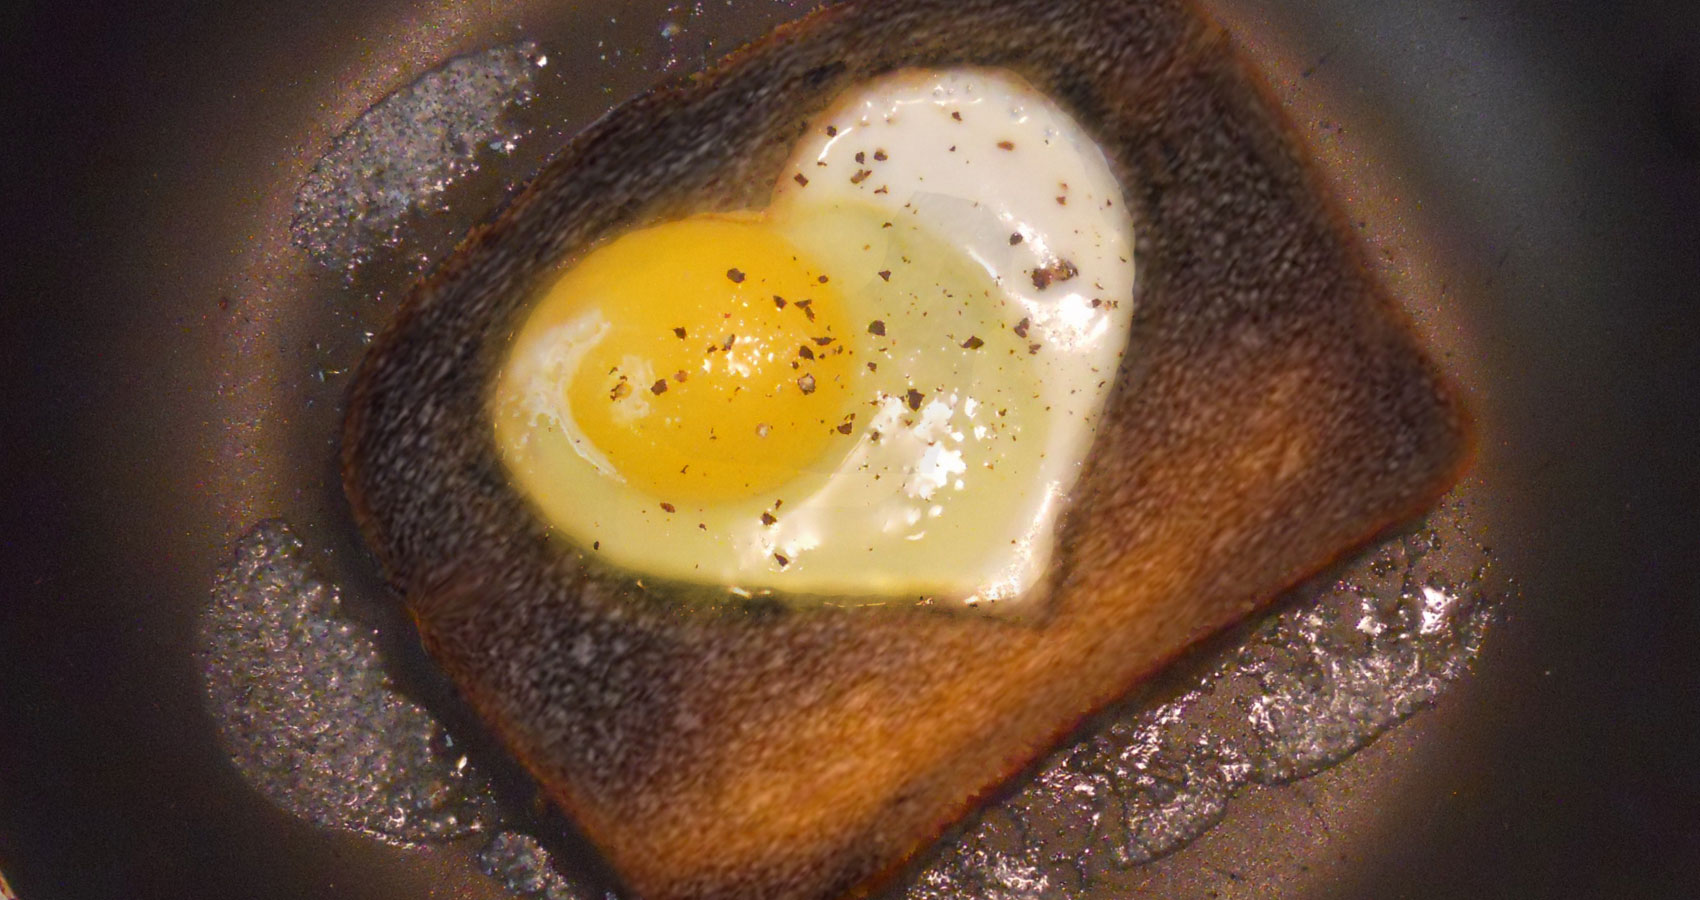 Burnt Toast, written by Angie Brocker at Spillwords.com